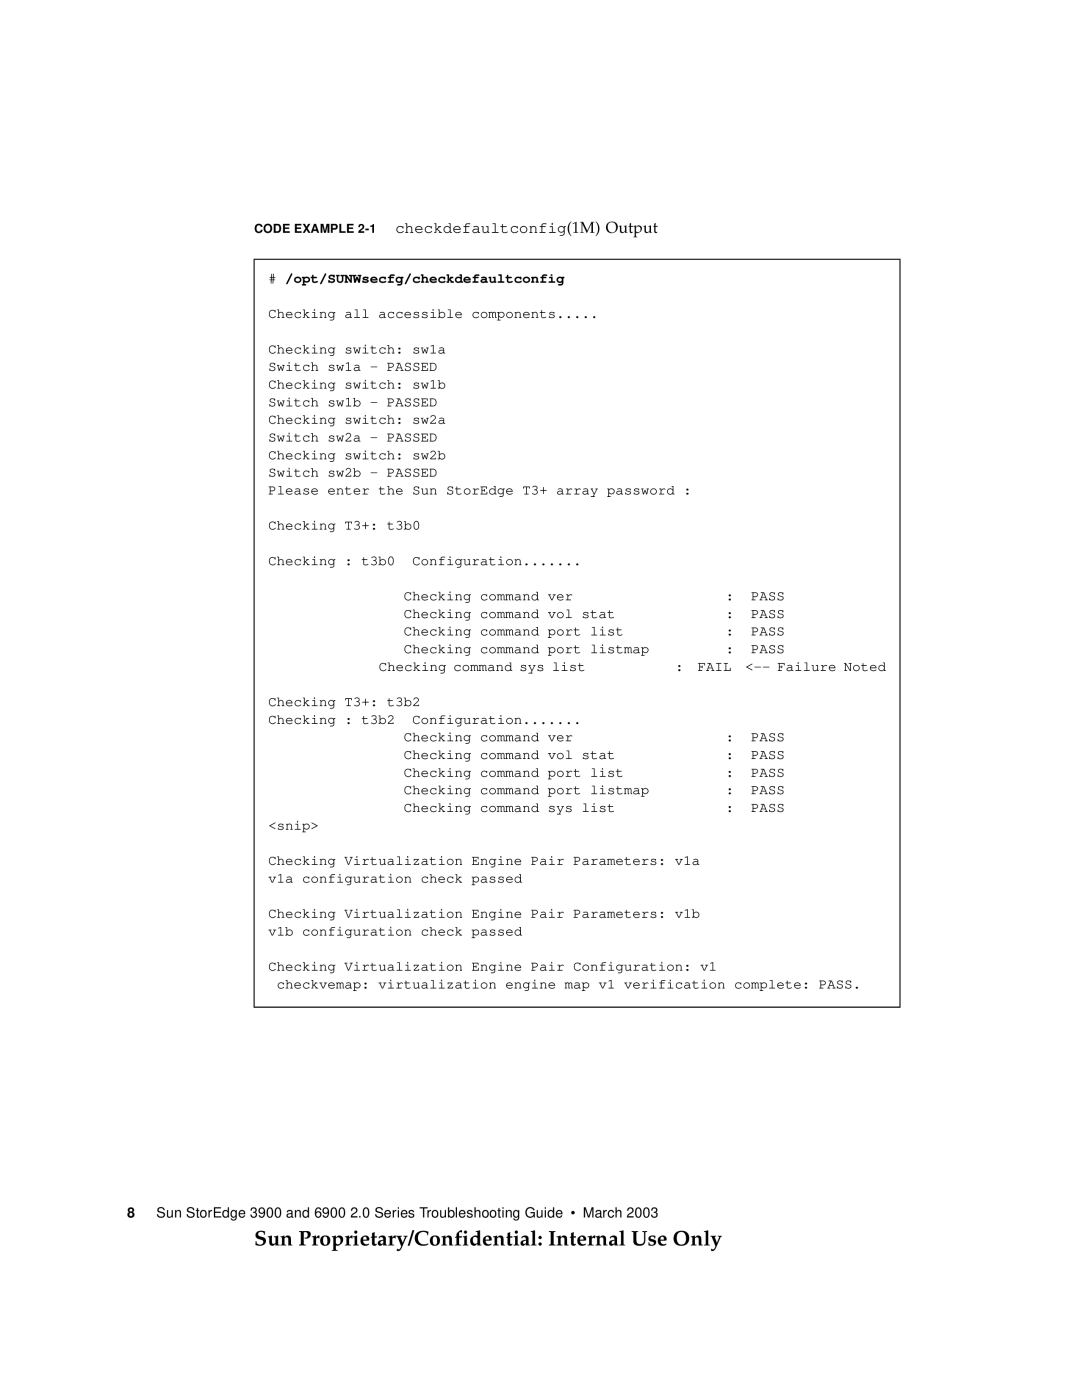 Sun Microsystems 3900, 6900 Sun Proprietary/Confidential Internal Use Only, CODE EXAMPLE 2-1 checkdefaultconfig1M Output 